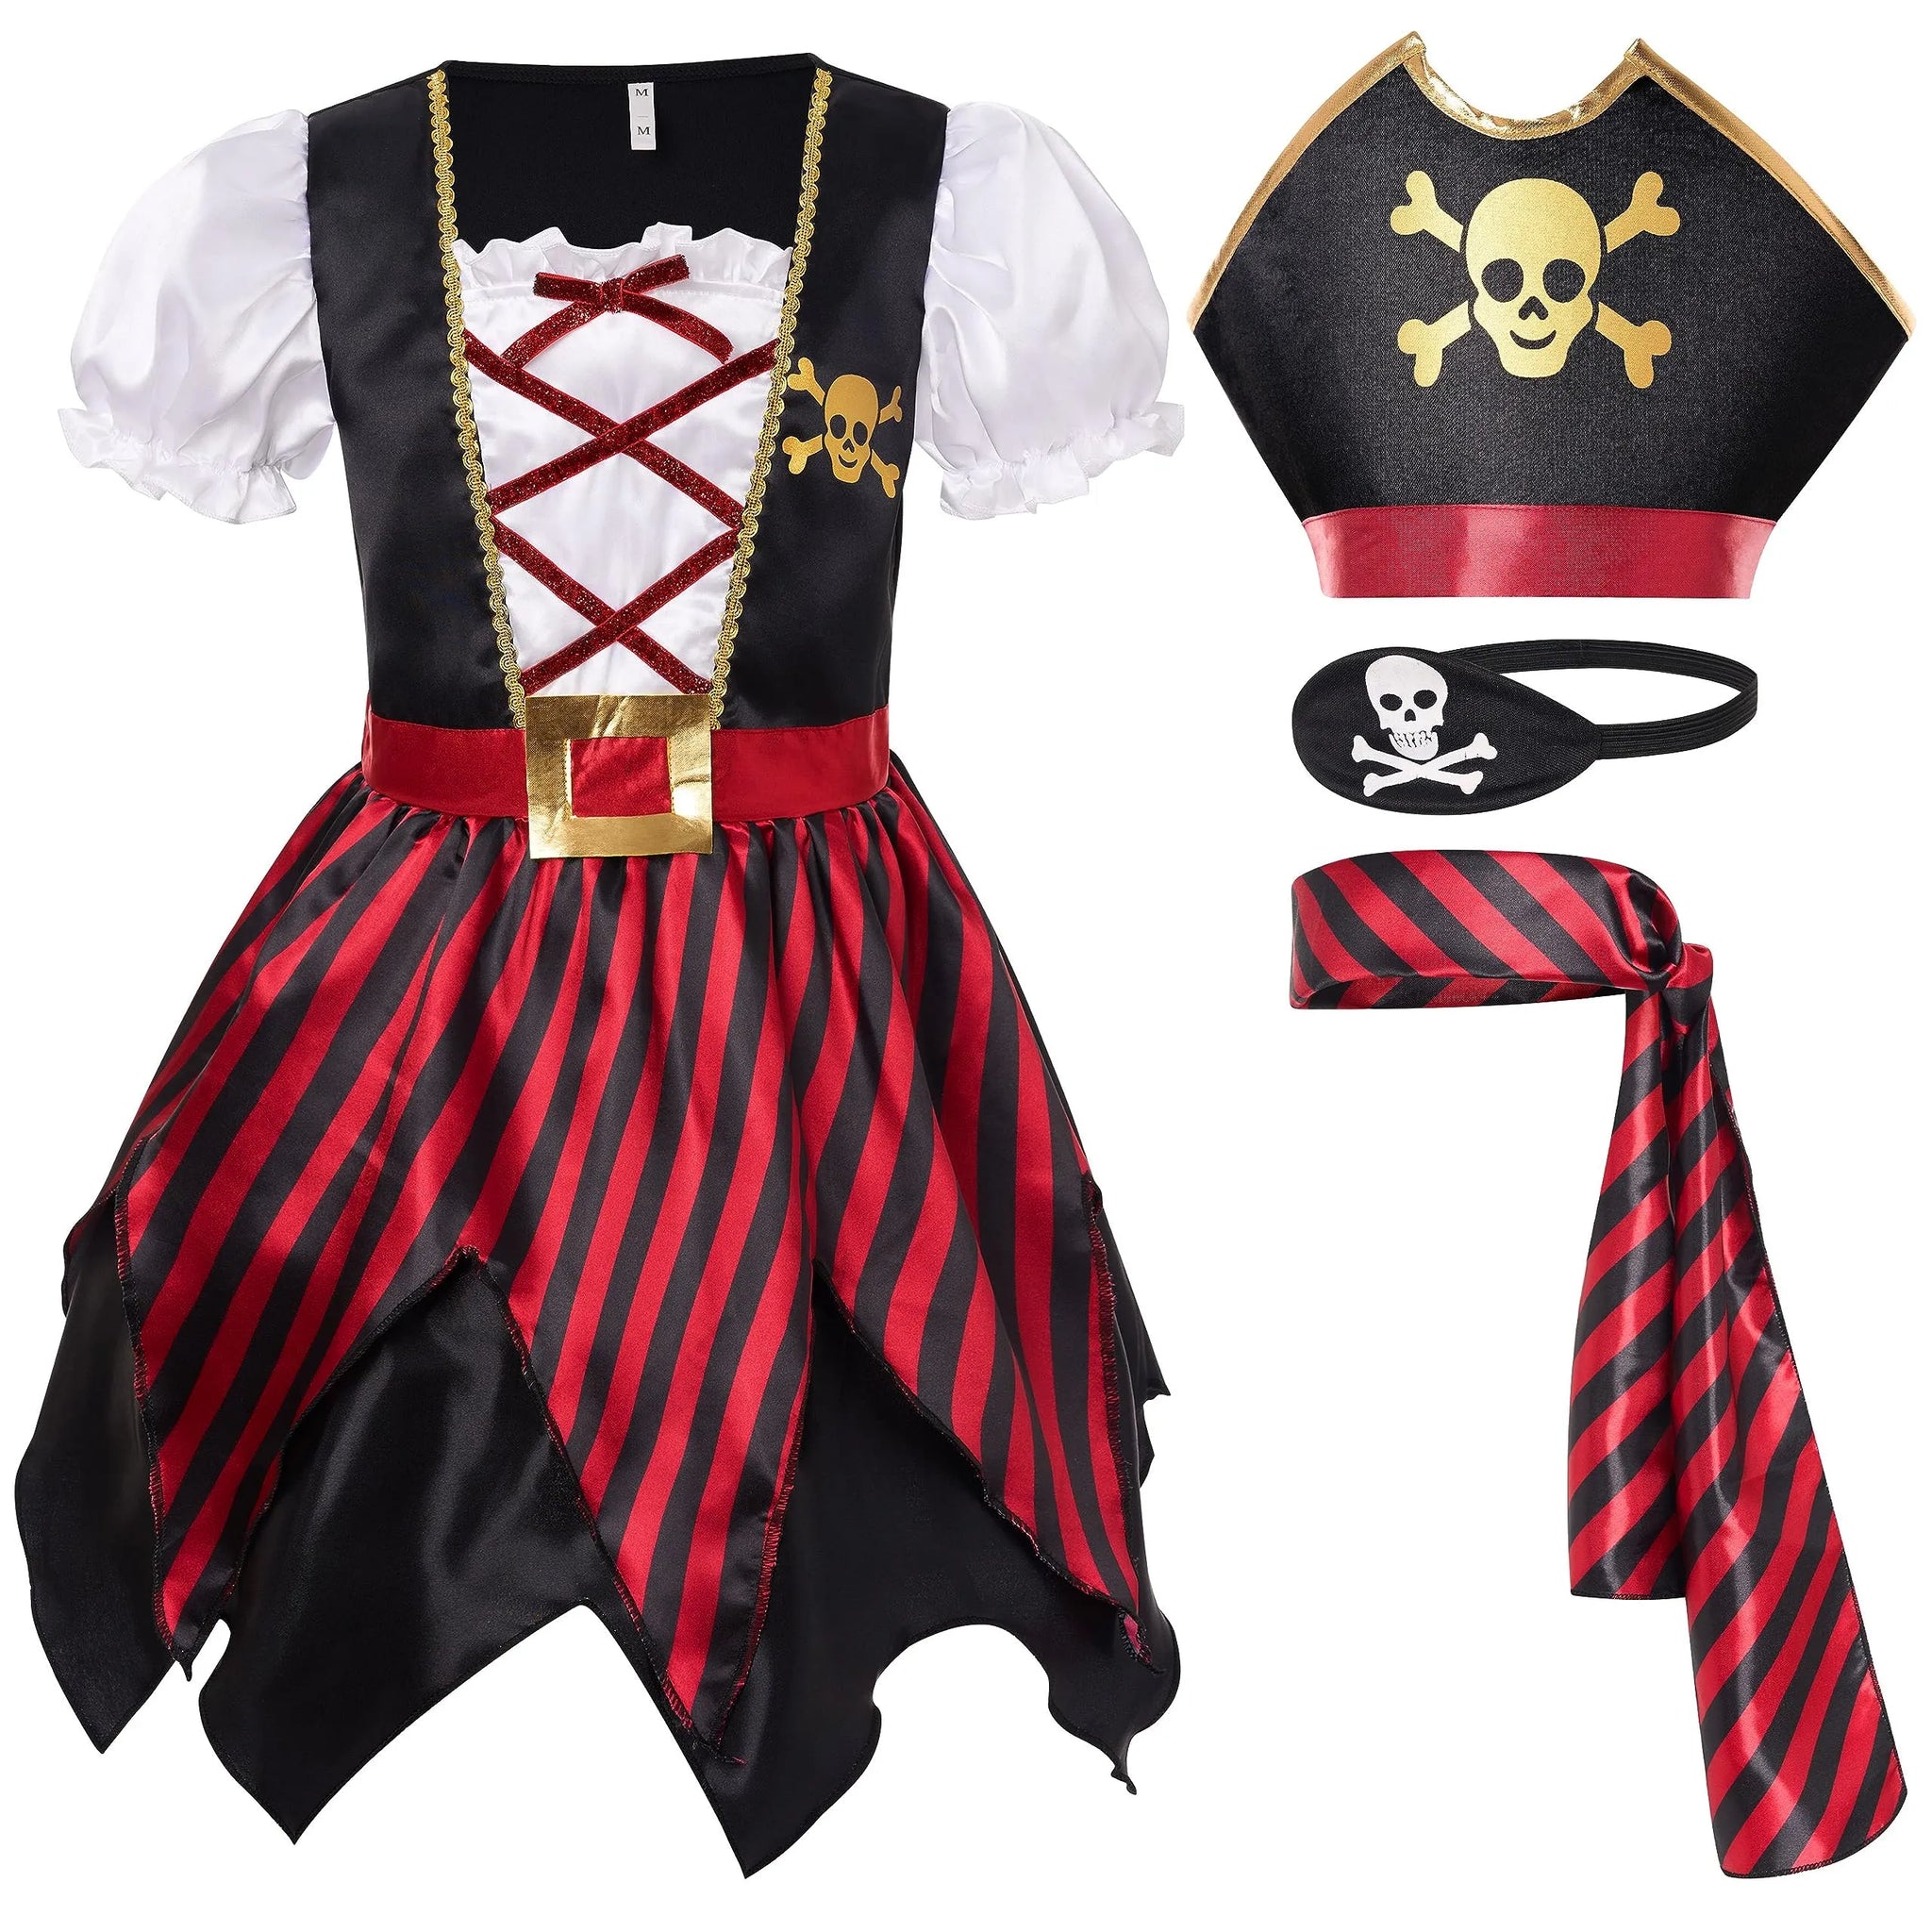 DNQCOS Pirate Costume Role Play Set - Sea Buccaneer Costume Dress up  Carnaval Birthday Christmas